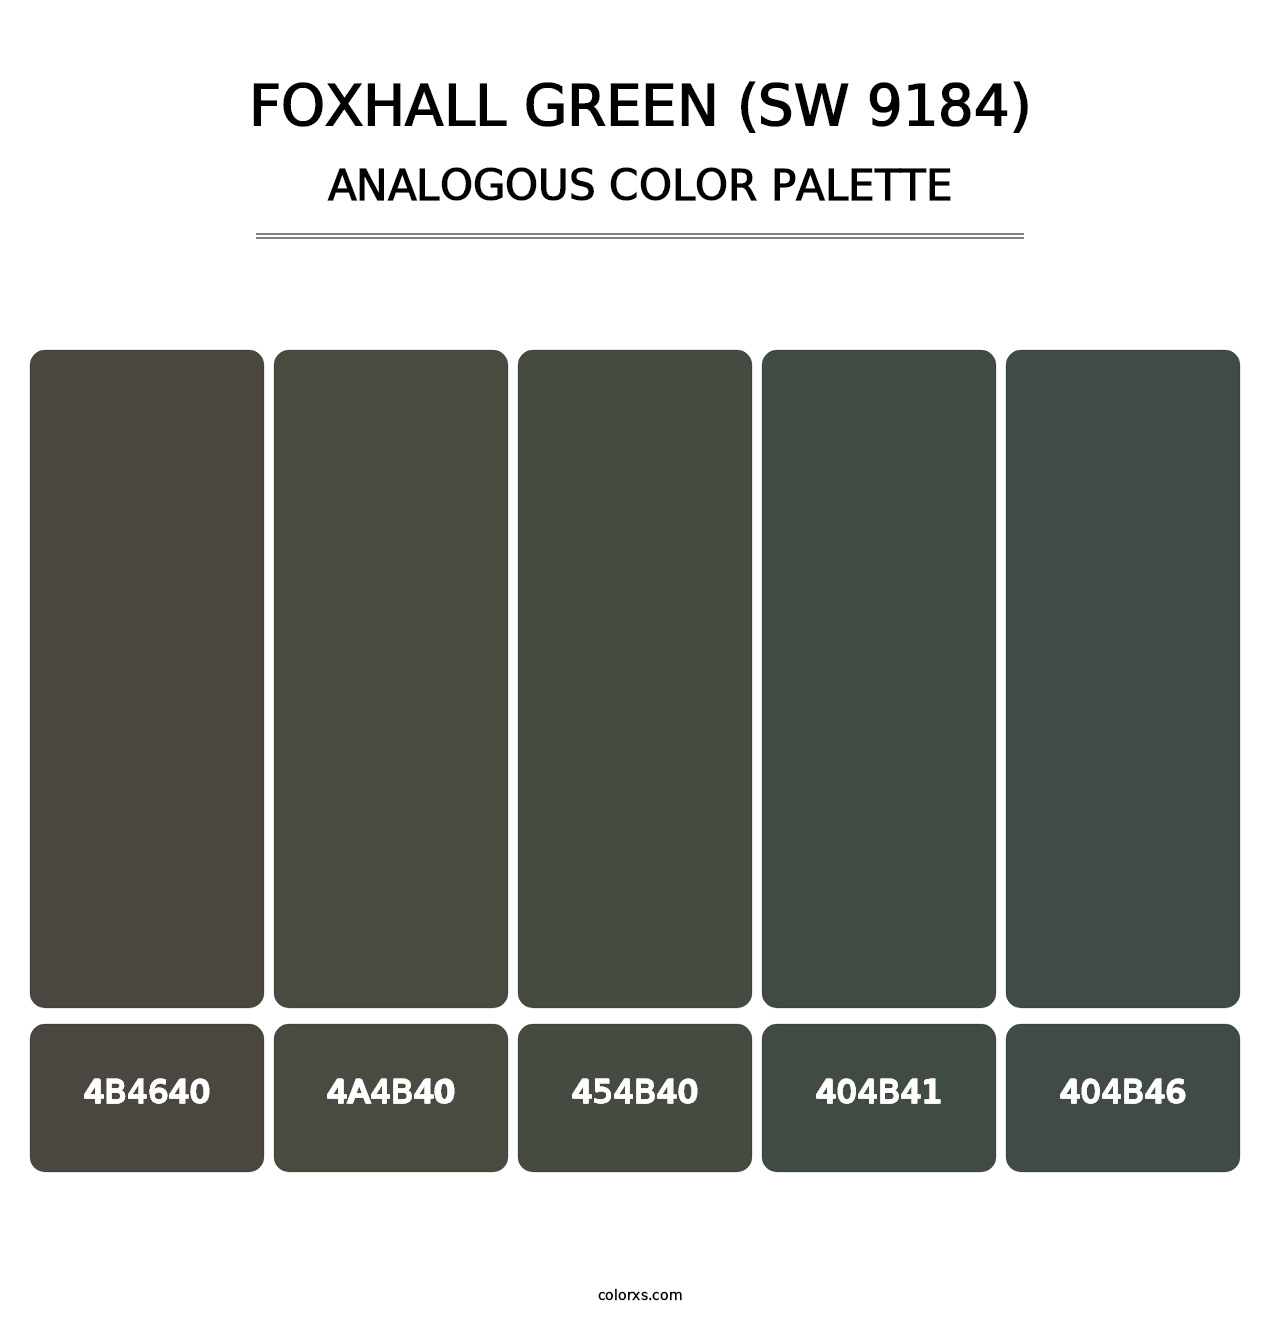 Foxhall Green (SW 9184) - Analogous Color Palette